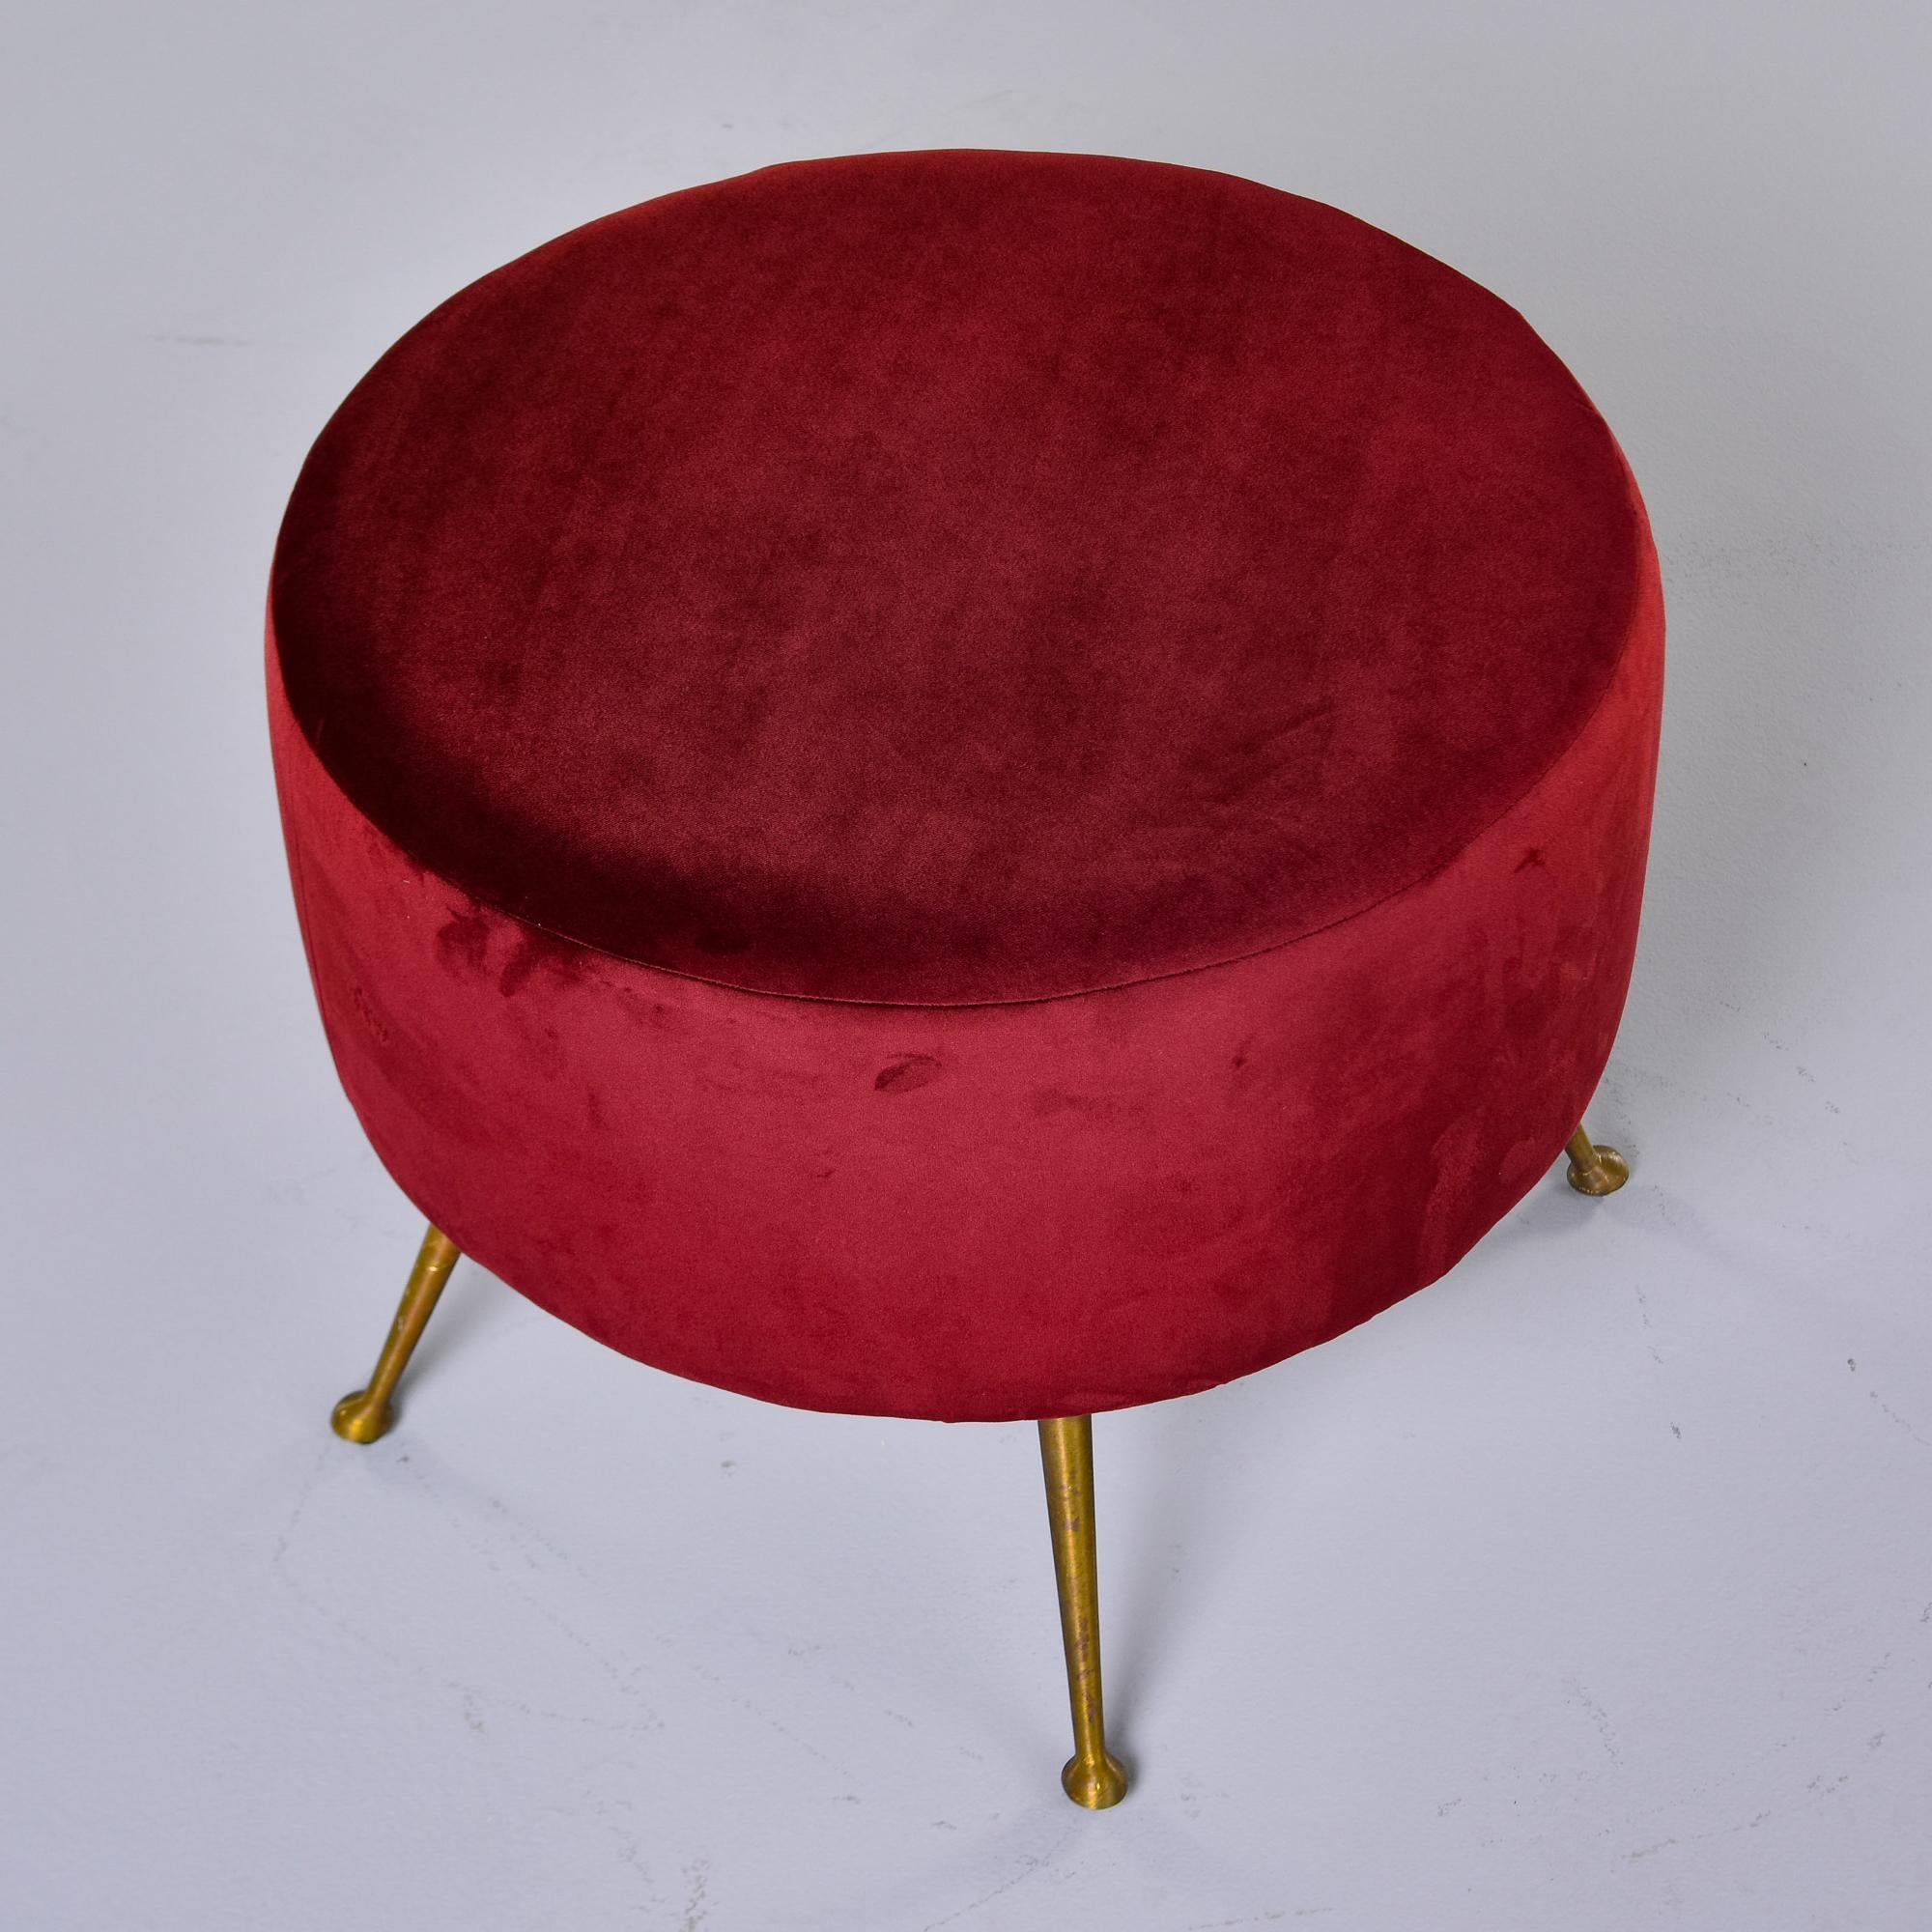 Italian Midcentury Round Stool with Red Upholstery and Brass Legs For Sale 4